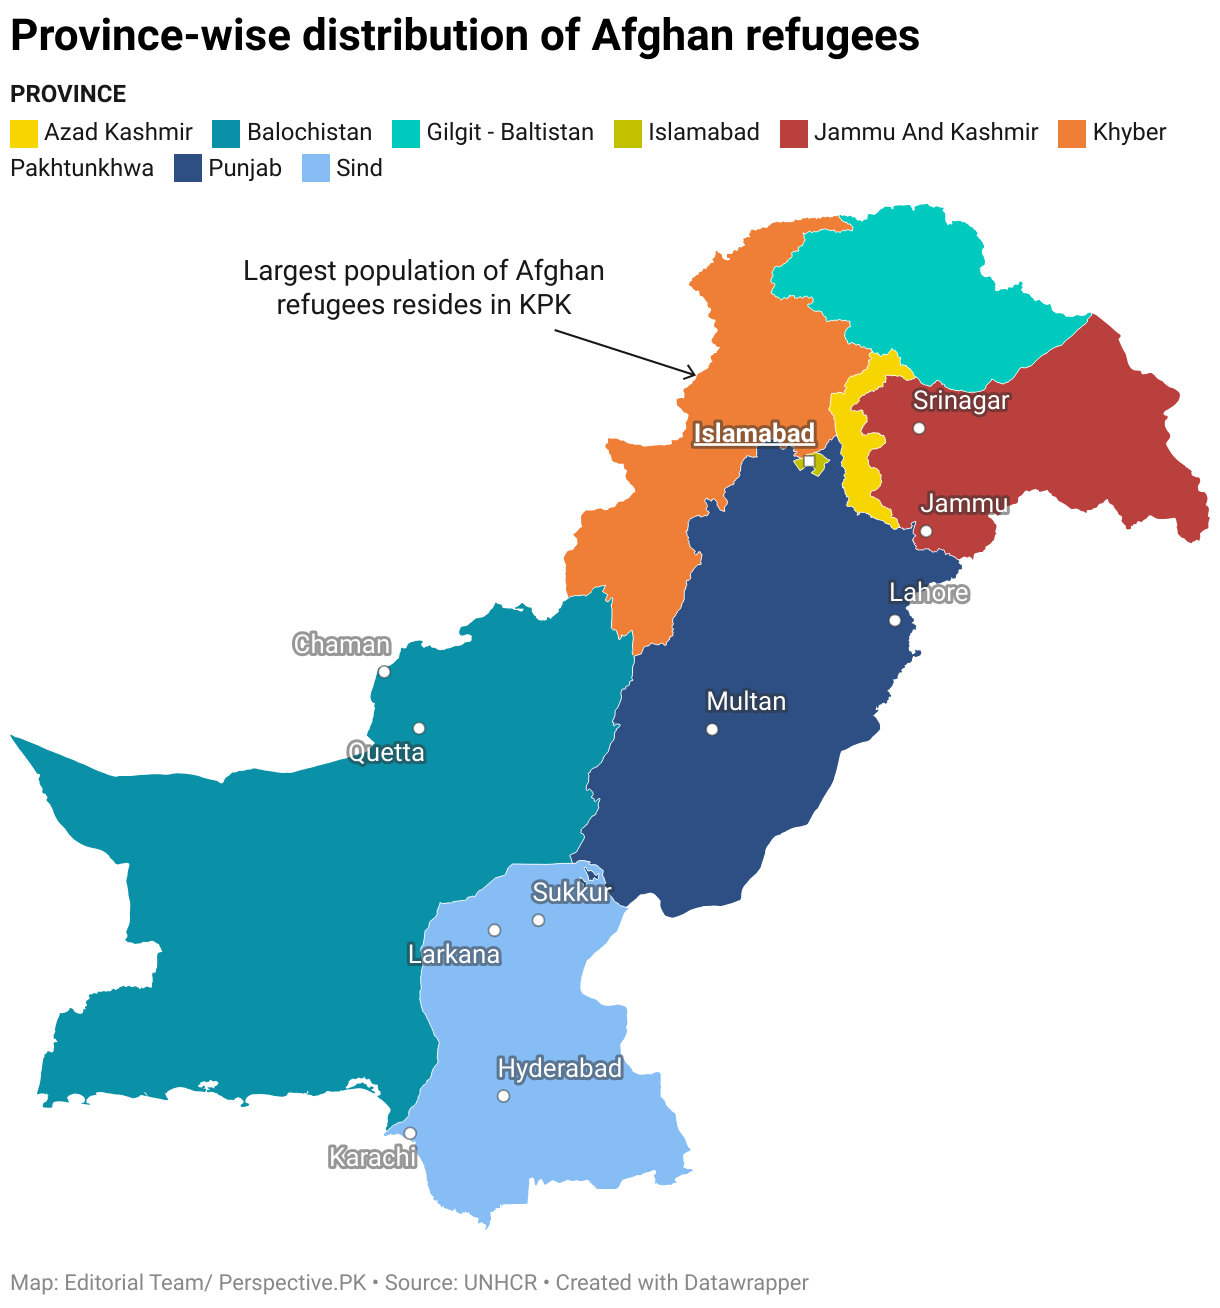 Province-wise distribution of Afghan refugees
Pakistan is one the largest hosting countries in the world, home to approximately 1.33 million officially registered refugees possessing PoR cards and asylum seekers, with 99 per cent being Afghans, 52pc of the total Afghan refugee population. Balochistan follows with 24.1pc, while Punjab accommodates 14.3pc. In Sindh, where the largest concentration of refugees is concentrated in Karachi, the figure stands at 5.4pc. Islamabad is home to 3.1pc of Afghan refugees.
PROVINCE	VALUE
Khyber Pakhtunkhwa	701358
Balochistan	321677
Punjab	191053
Sind	73789
Islamabad	41520
Azad Kashmir	4352
